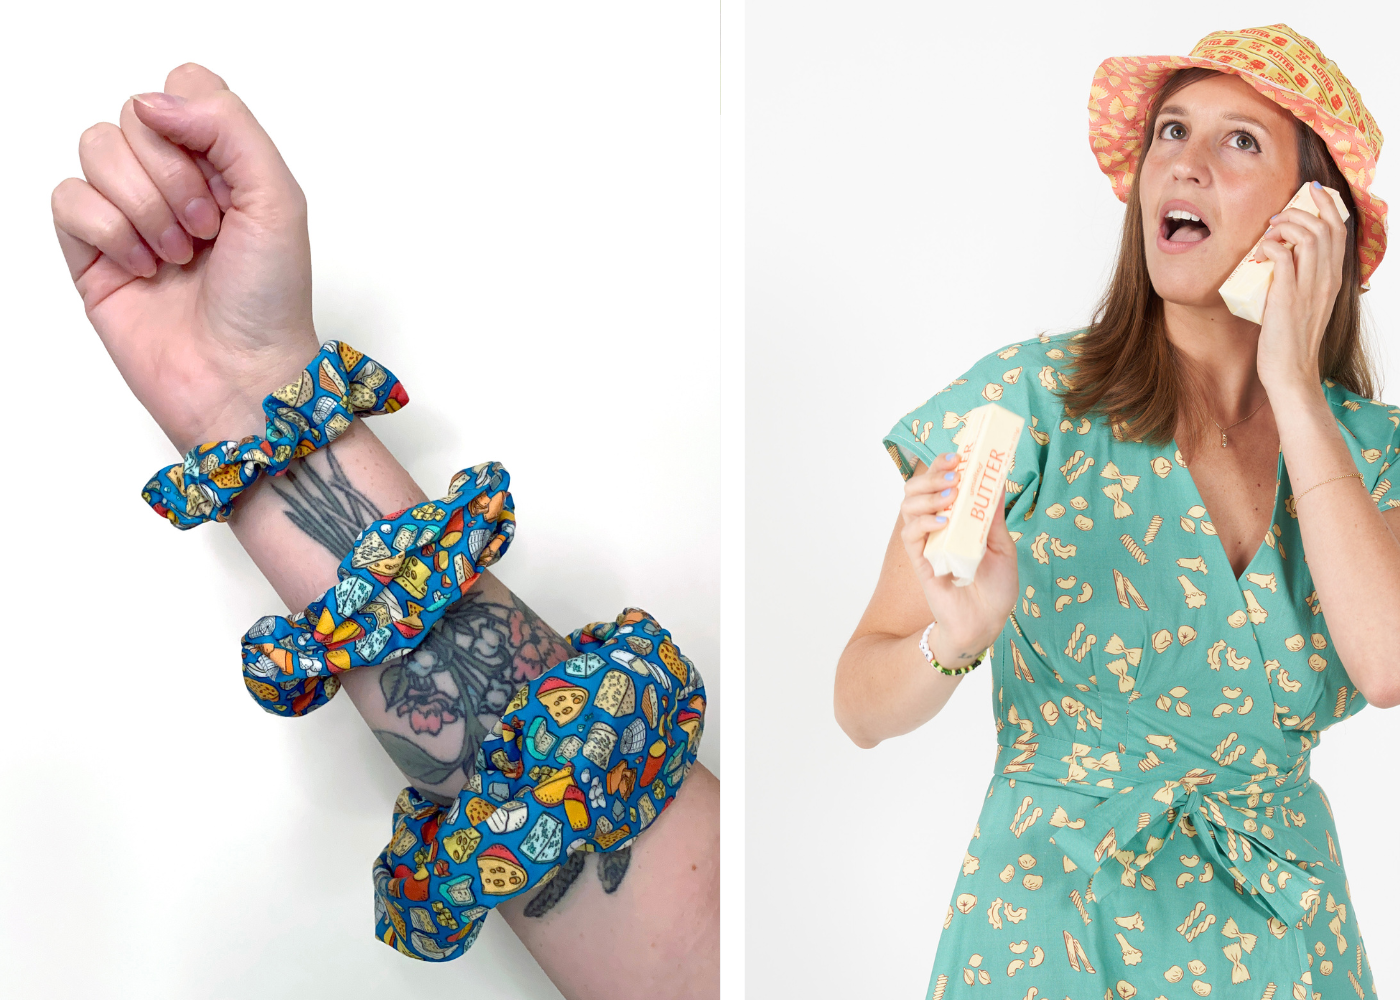 The left side of the image is an arm with three cheese themed scrunchies. The right side of the image is a woman wearing a blue green pasta themed wrap dress, a bucket hat, and holding butter up to her ear as if the butter is giving her a call.